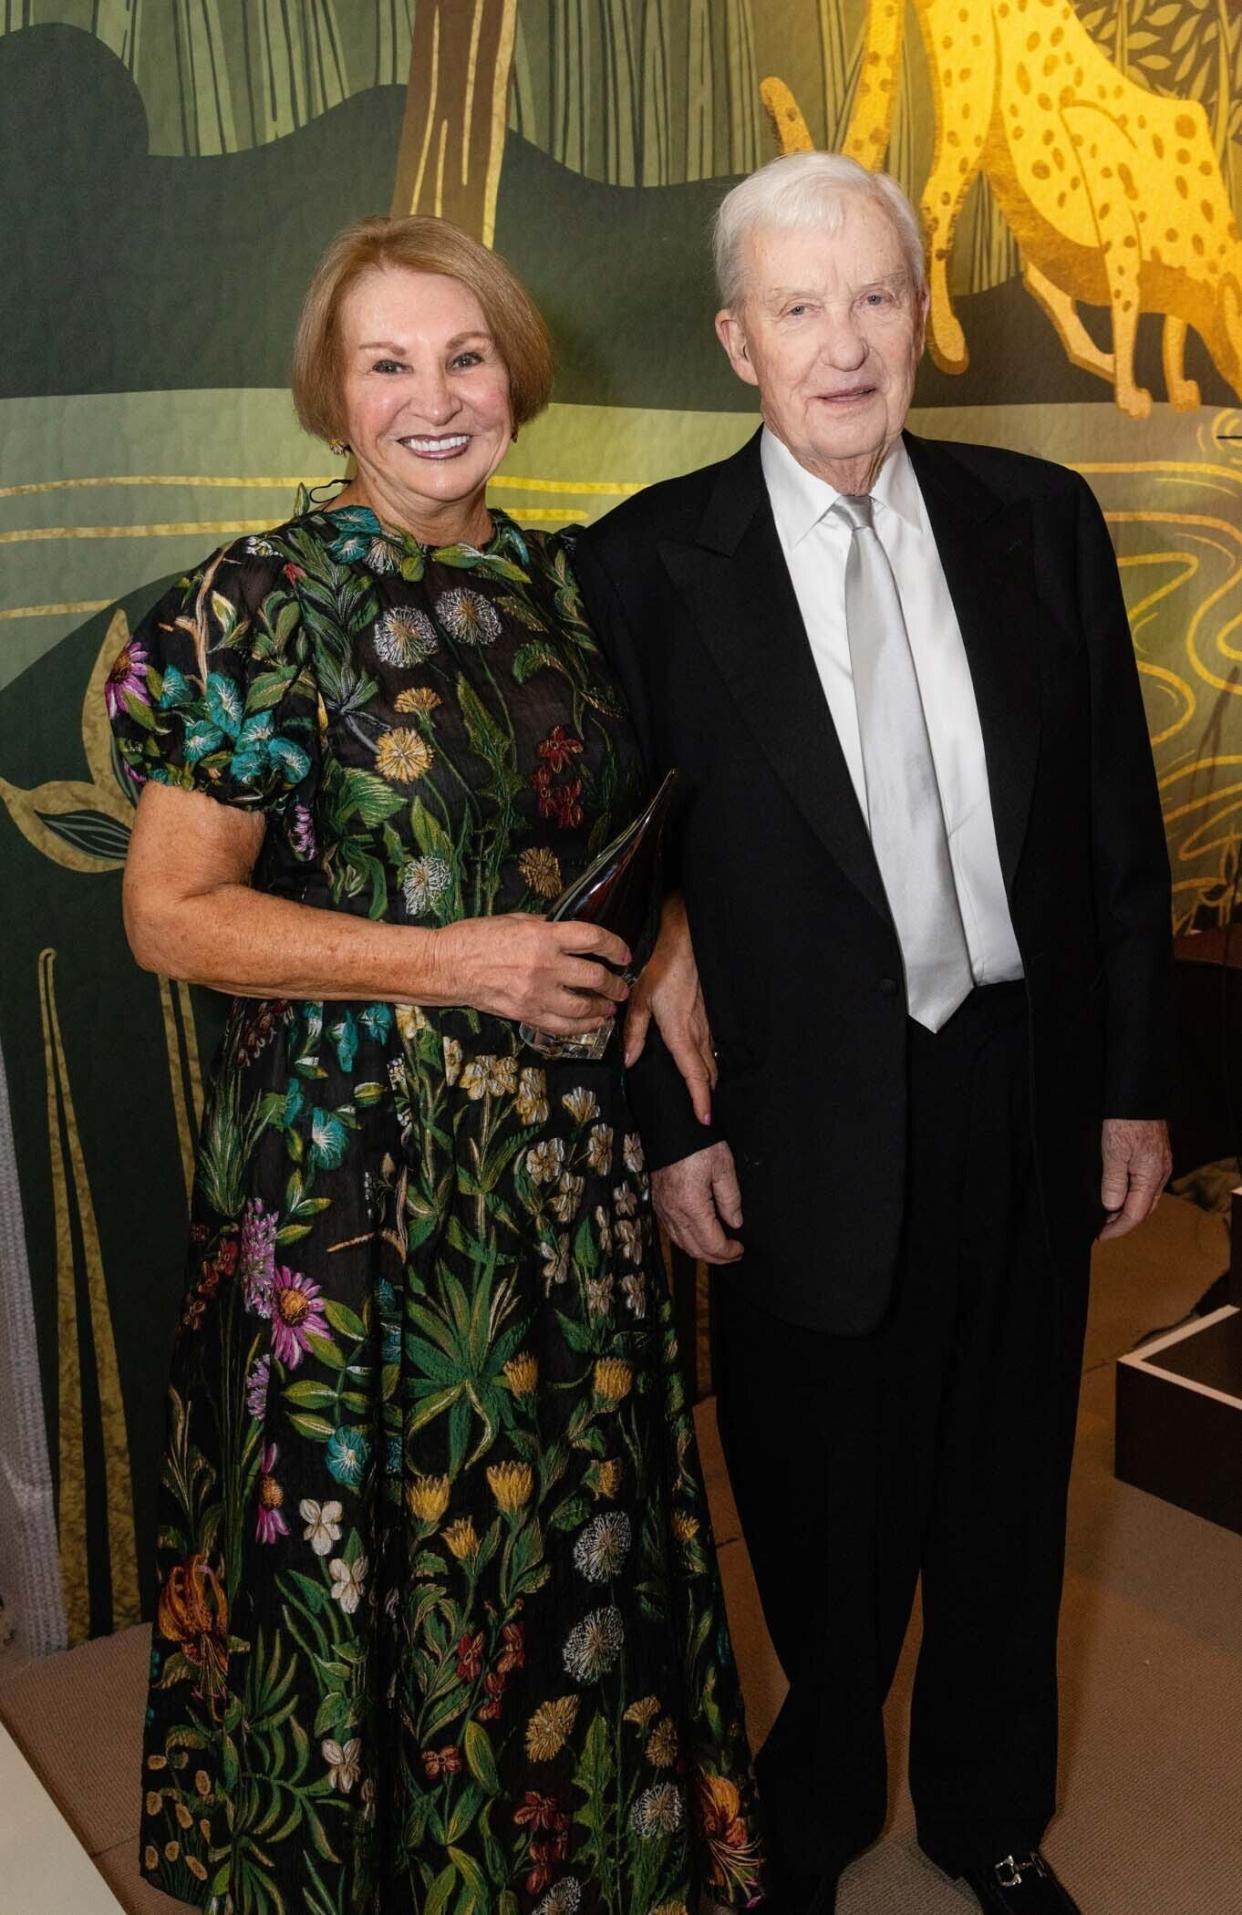 Patrick and Sandra Rooney were honored at the Palm Beach Zoo & Conservation Society annual gala in January.